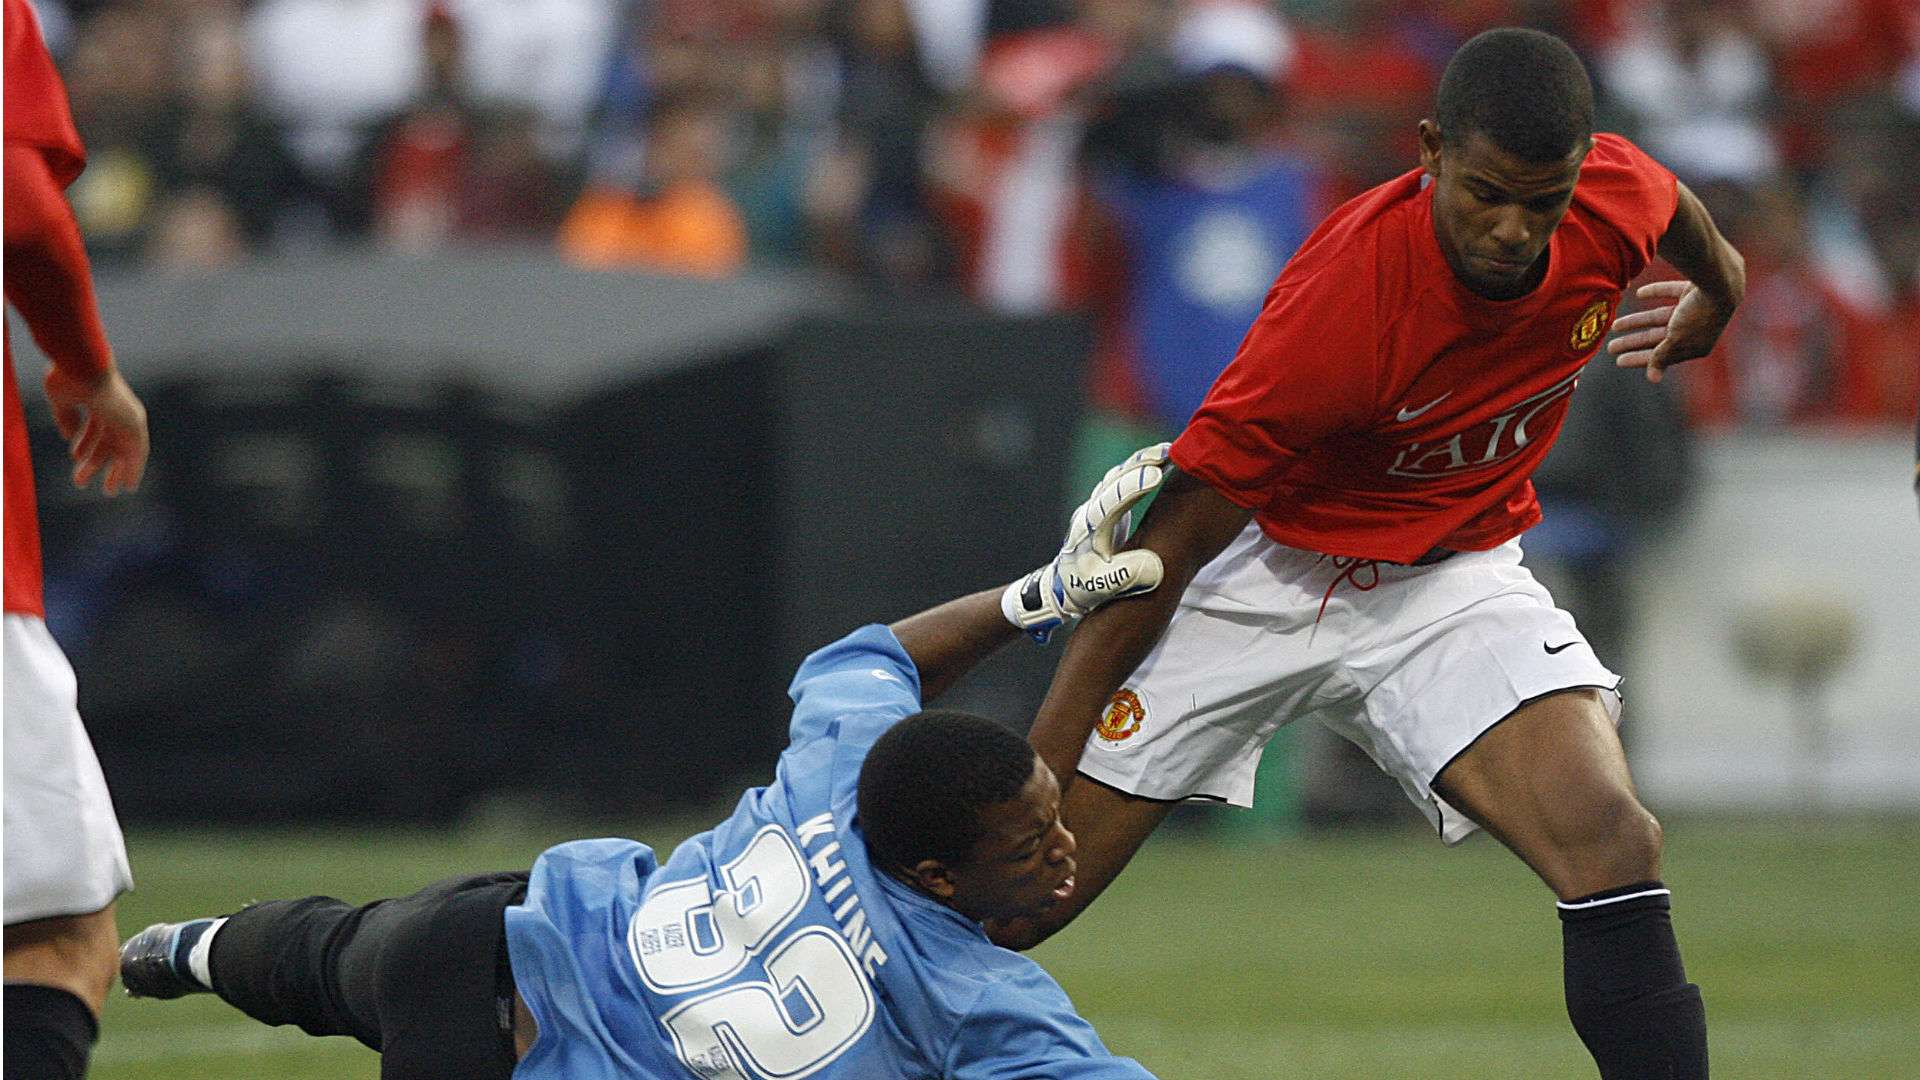 Itumeleng Khune of Kaizer Chiefs and Frazer Campbell of Manchester United